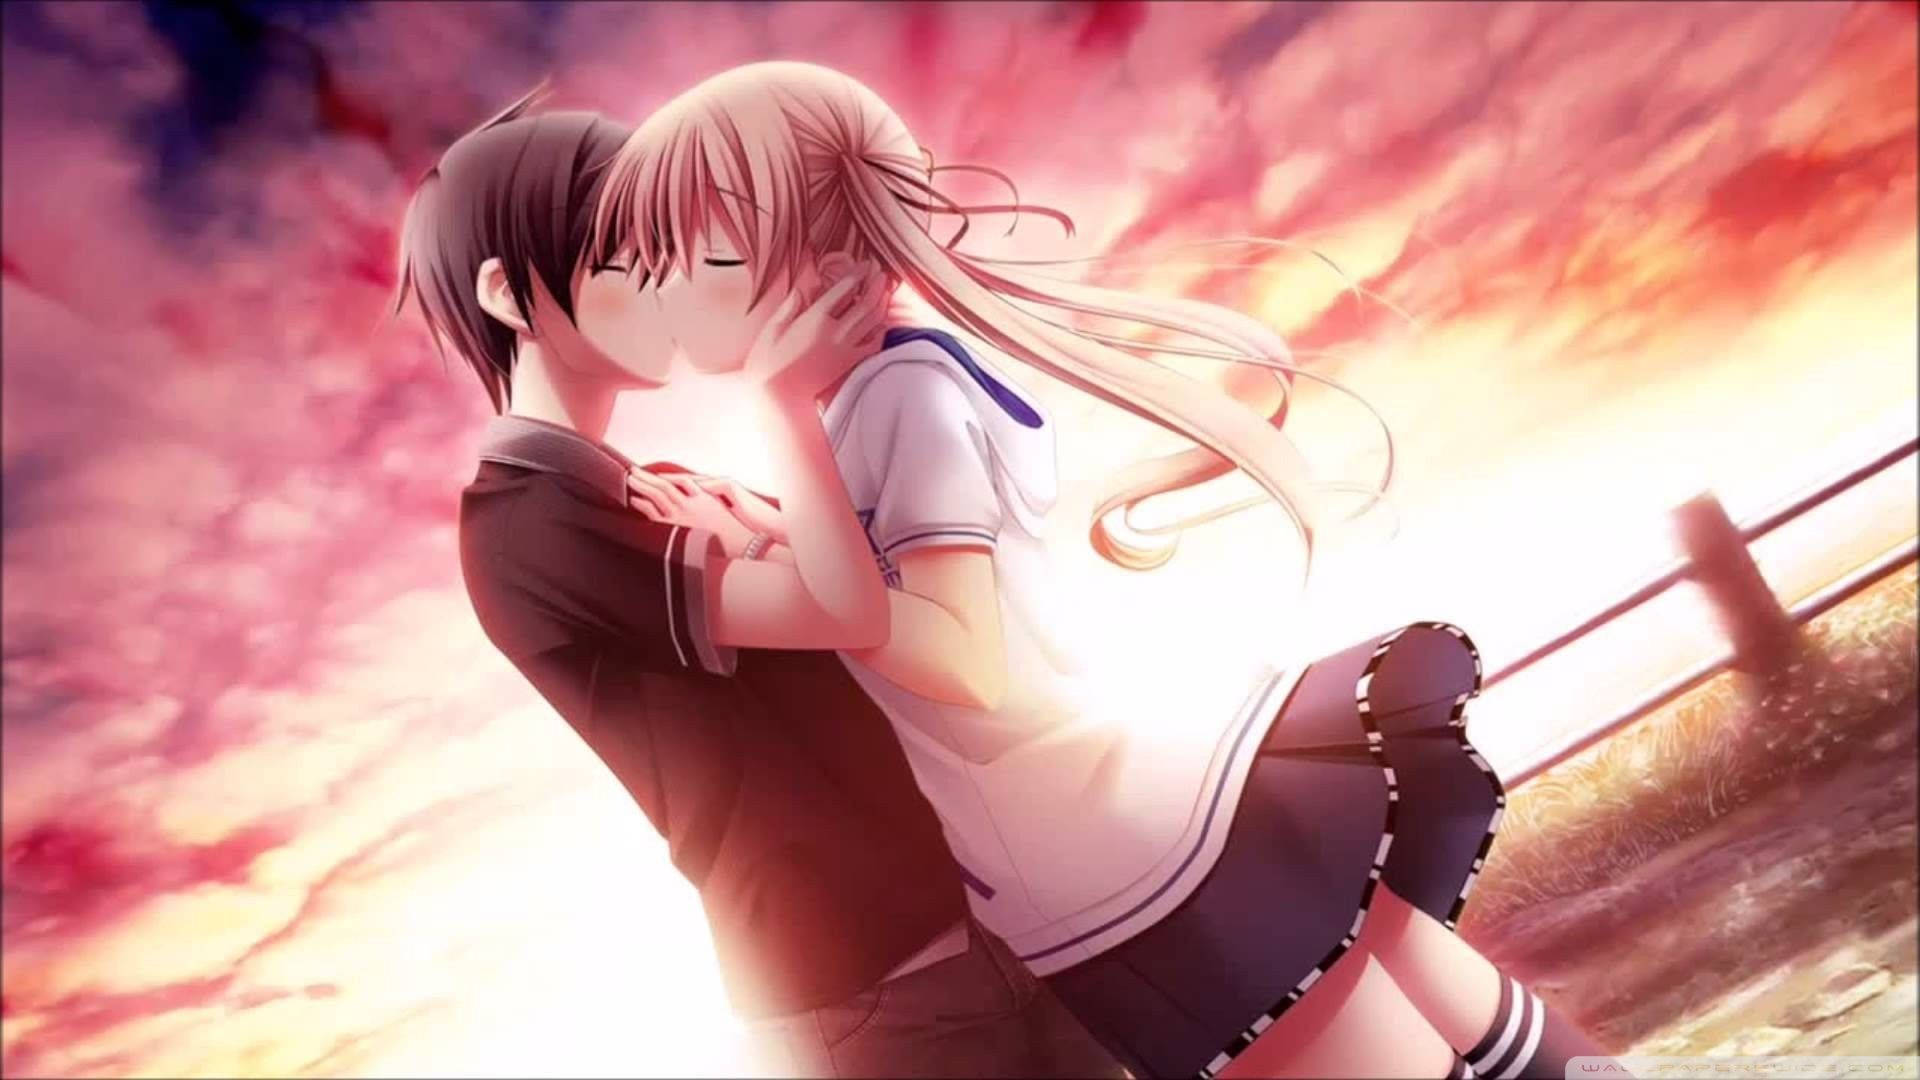 Anime Boy And Girl Kissing Wallpapers  Wallpaper Cave